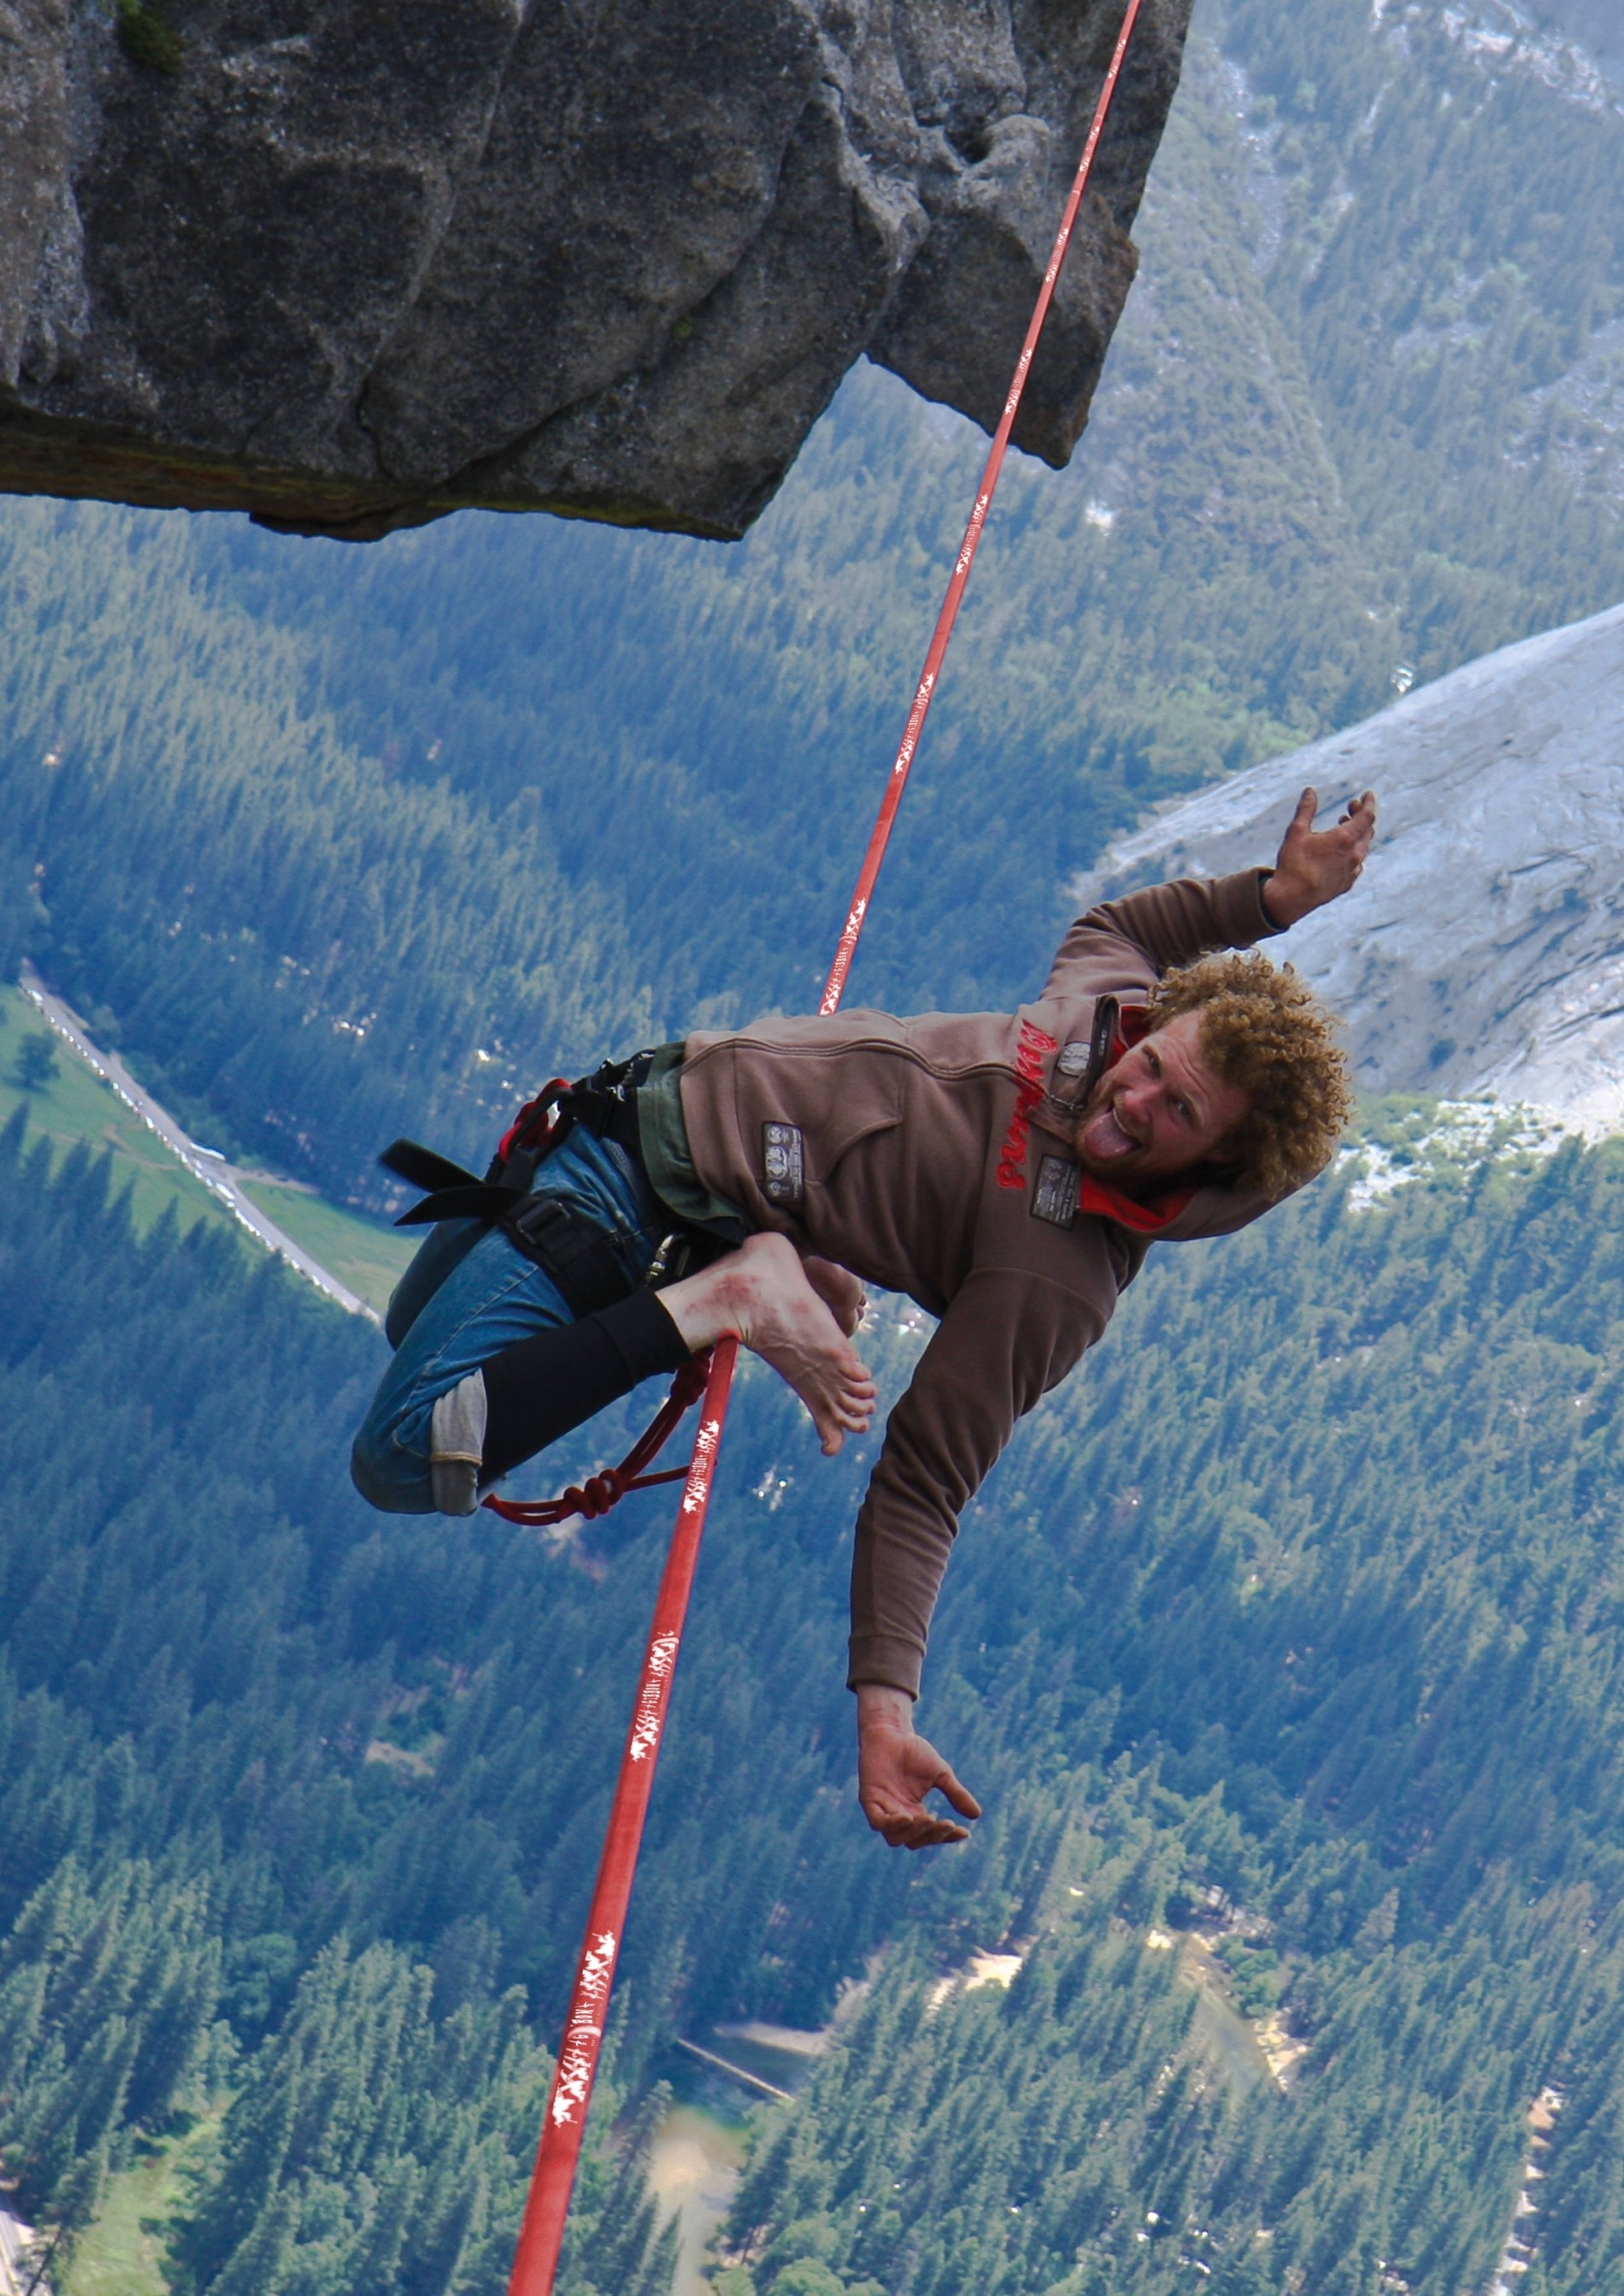 Slacklining: Walking on a rope at a high altitude, A climbing harness, Performance. 1900x2690 HD Wallpaper.